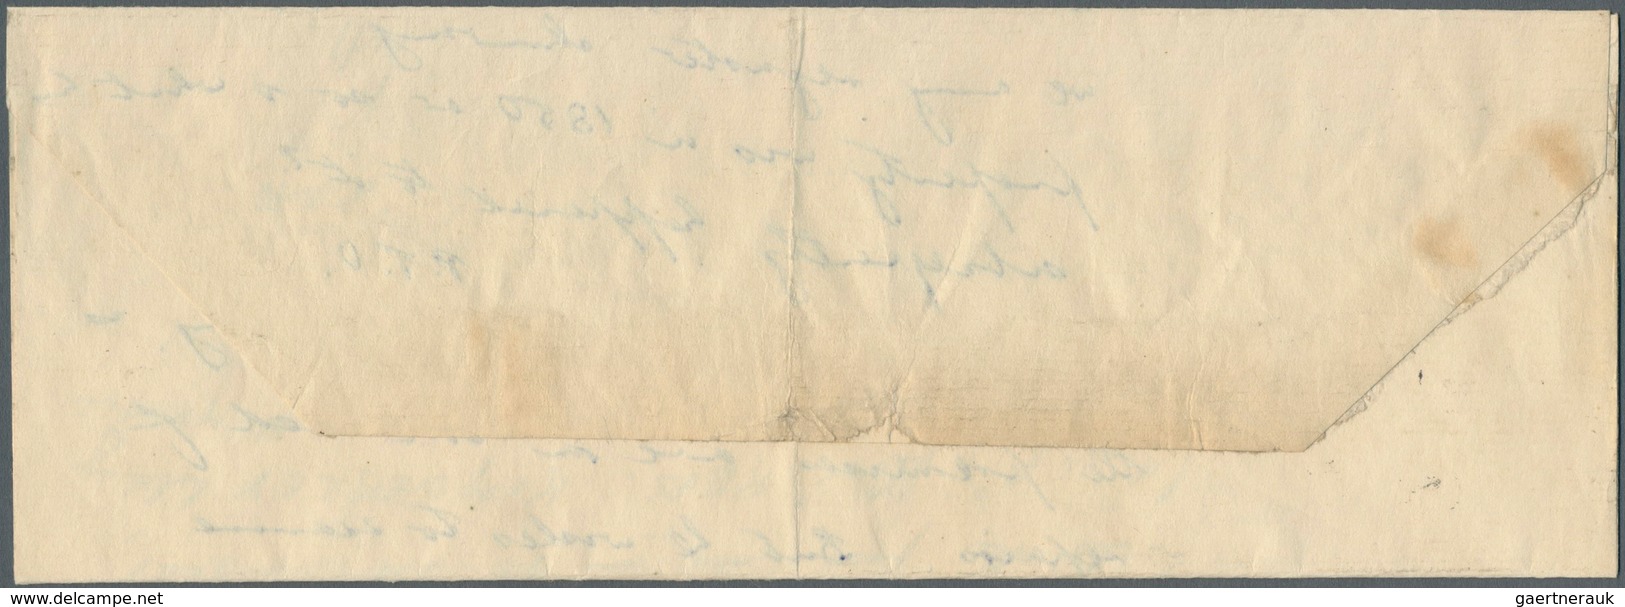 Irland - Ganzsachen: The Legal Diary: 1951, 1 1/2 D. Violet Newspaper Wrapper With Watermark, Used L - Ganzsachen